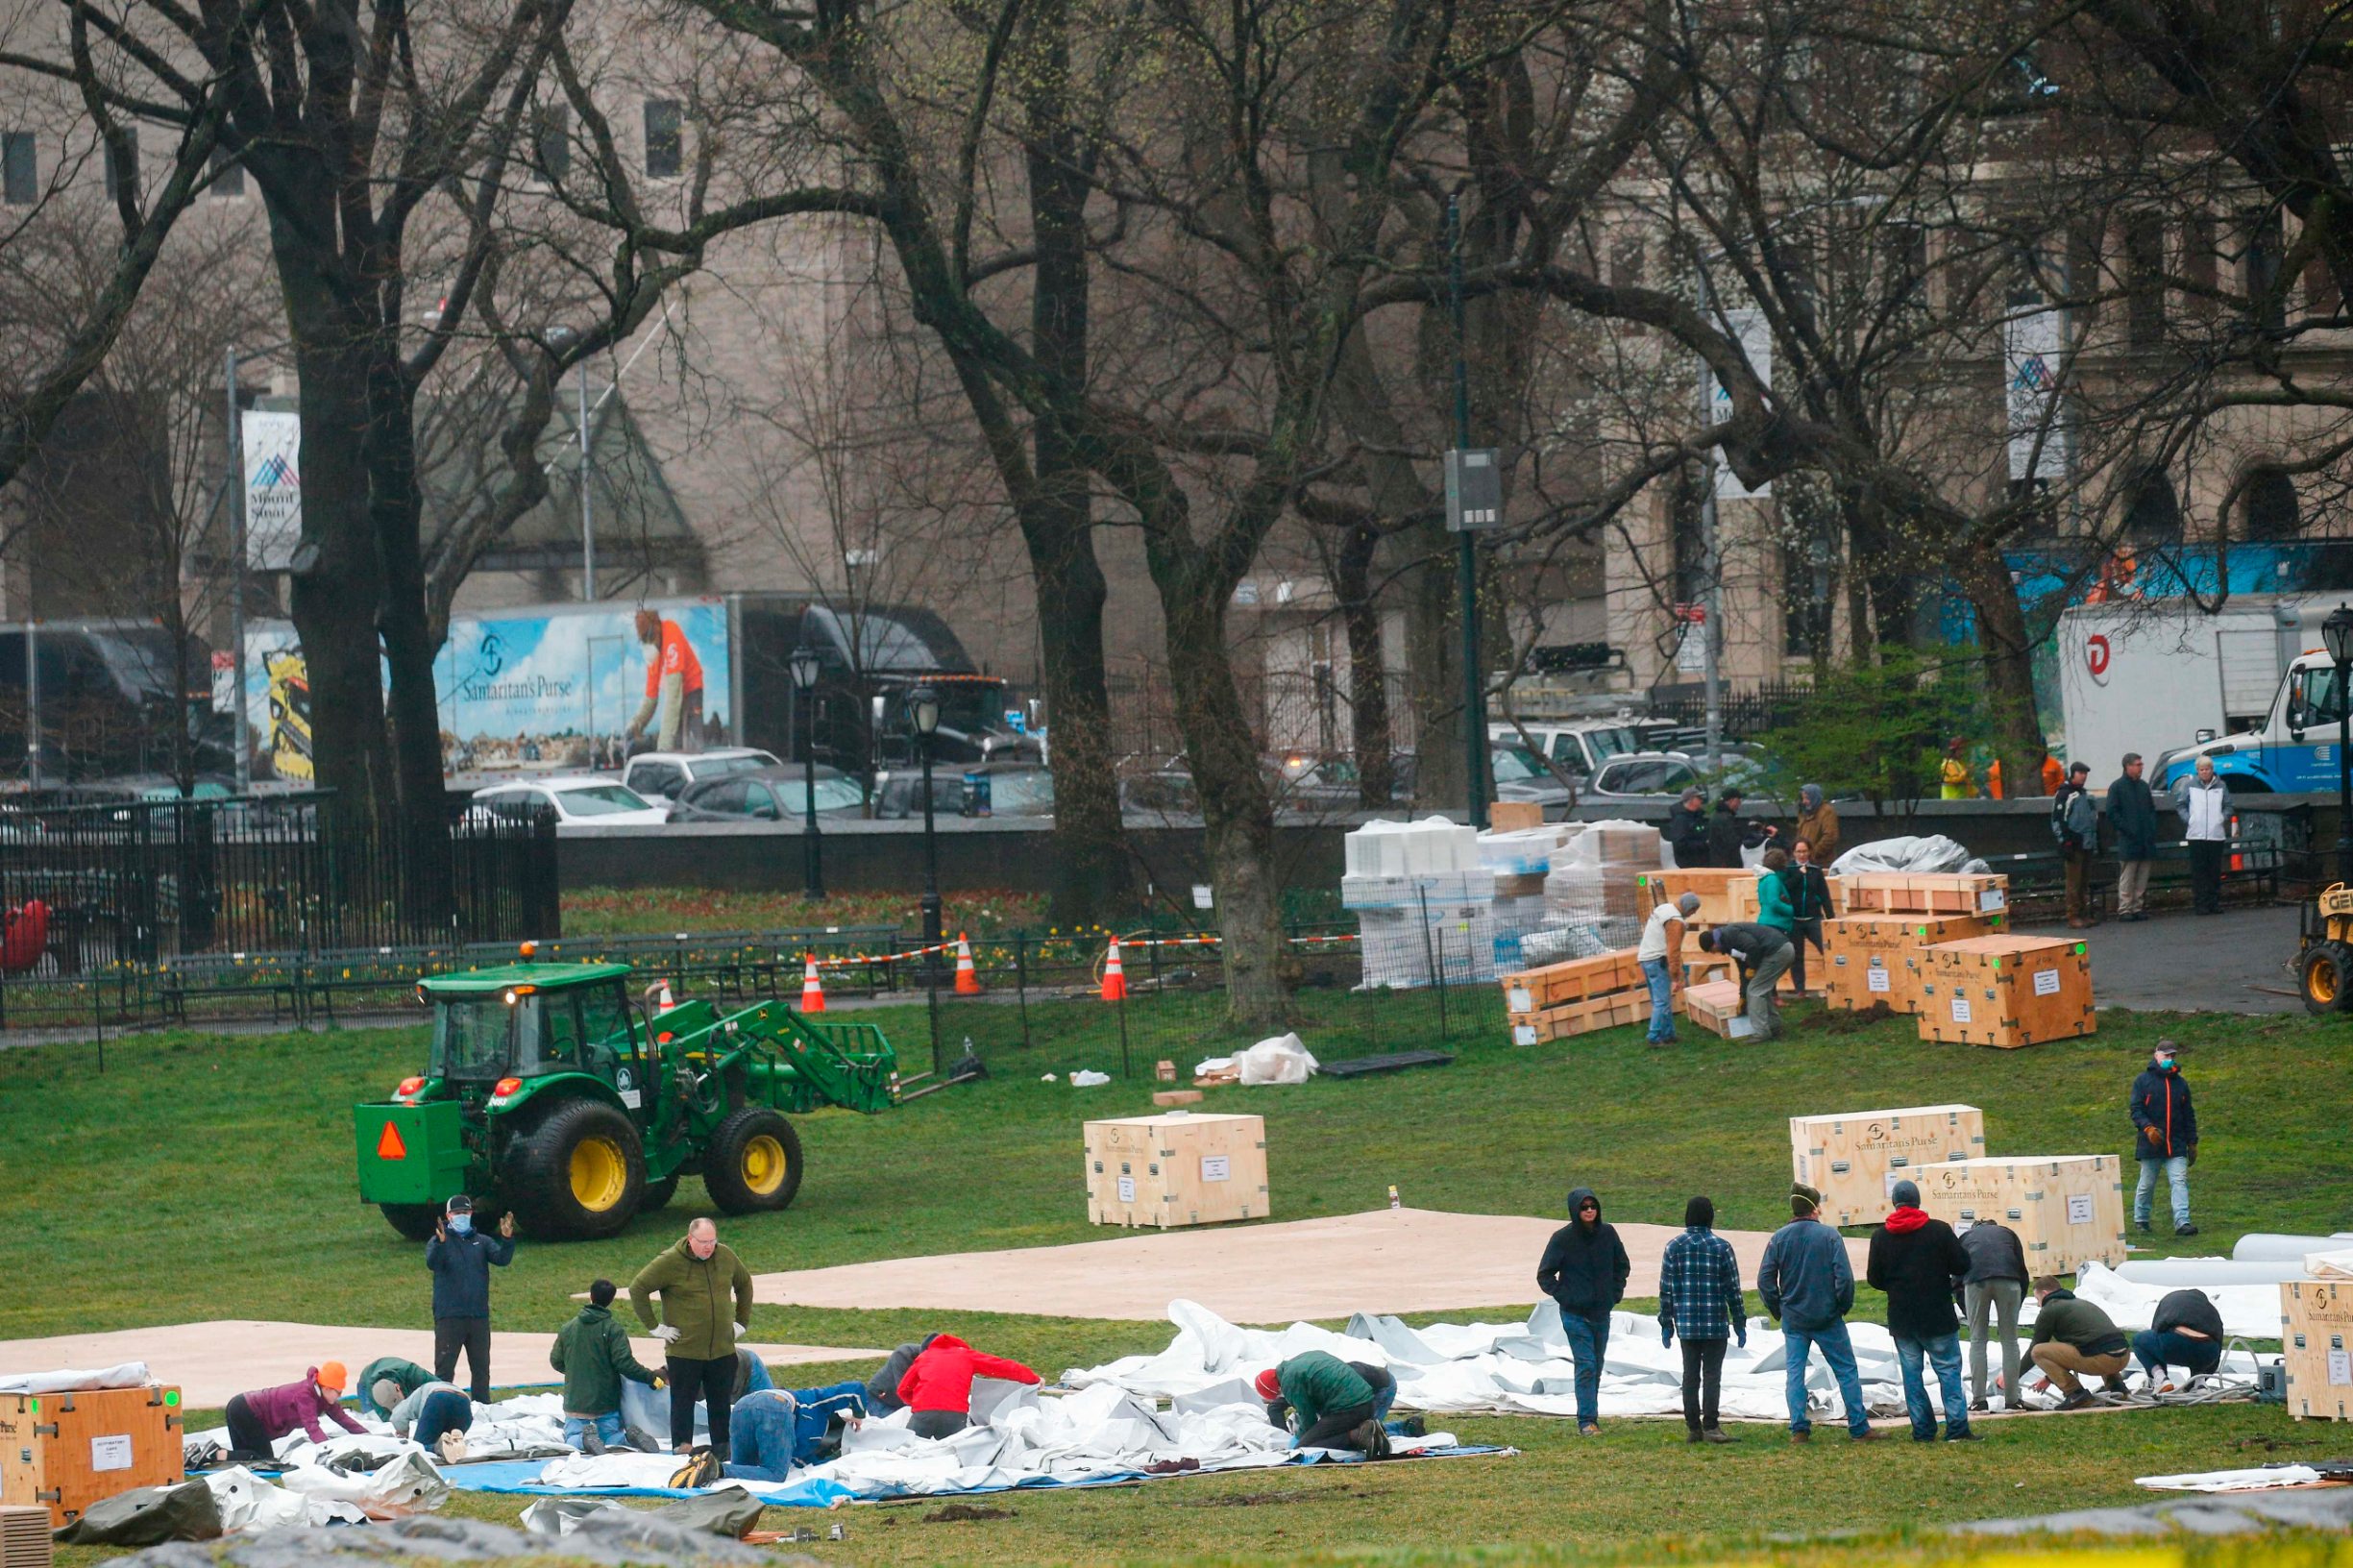 Workers set up a camp in front of Mount Sinai West Hospital inside Central Park on March 29, 2020 in New York City. - A senior US scientist issued a cautious prediction March 29, 2020 that the novel coronavirus could claim 100,000 to 200,000 lives in the United States. Dr. Anthony Fauci, who leads research into infectious diseases at the National Institutes of Health, told CNN that models predicting a million or more deaths were 